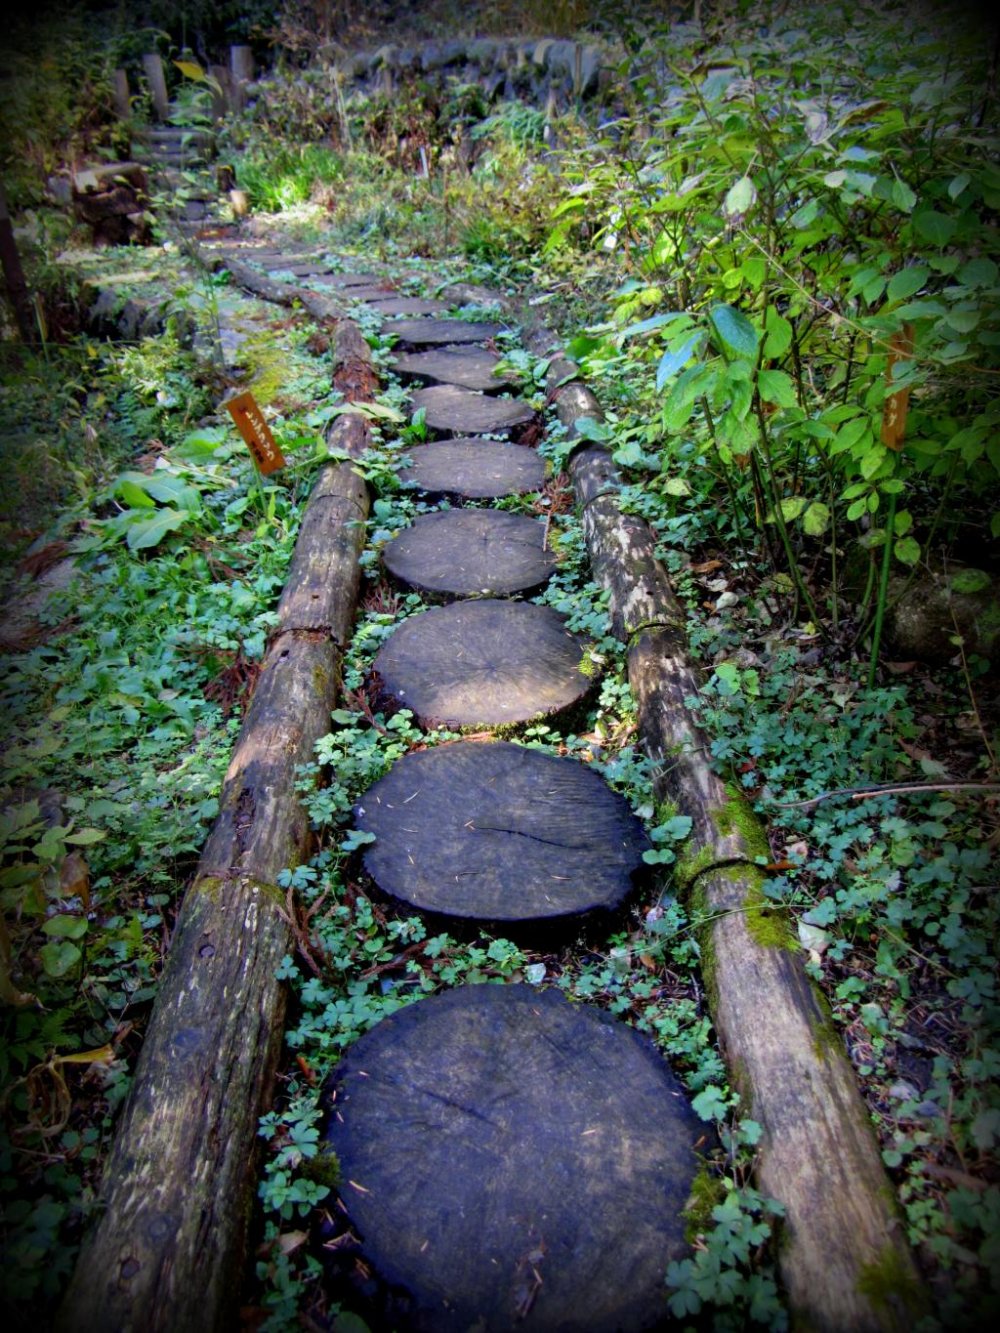 Instead of stones, this walkway is made with tree rounds